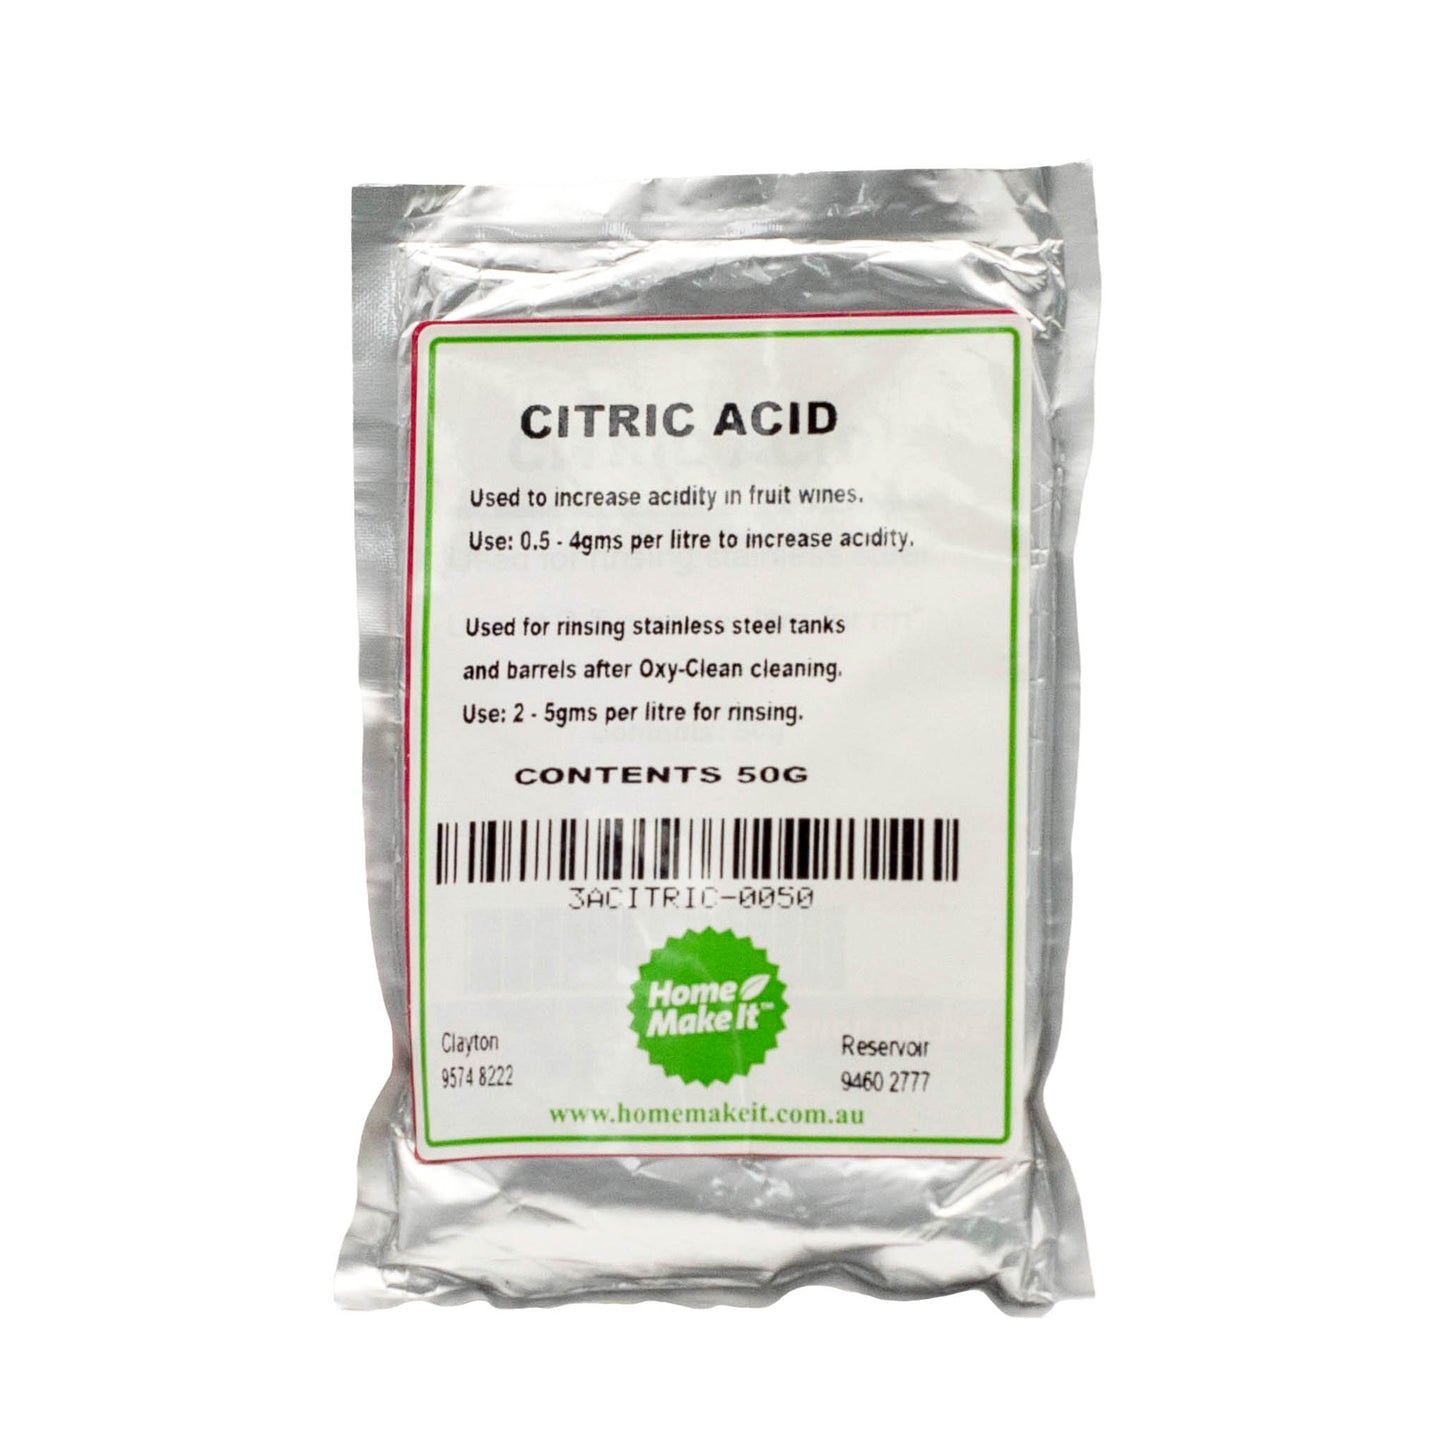 Citric acid 50 grams. Used to increasse acidity in fruit wines and for rinsing stainless steel tanks and barrels.